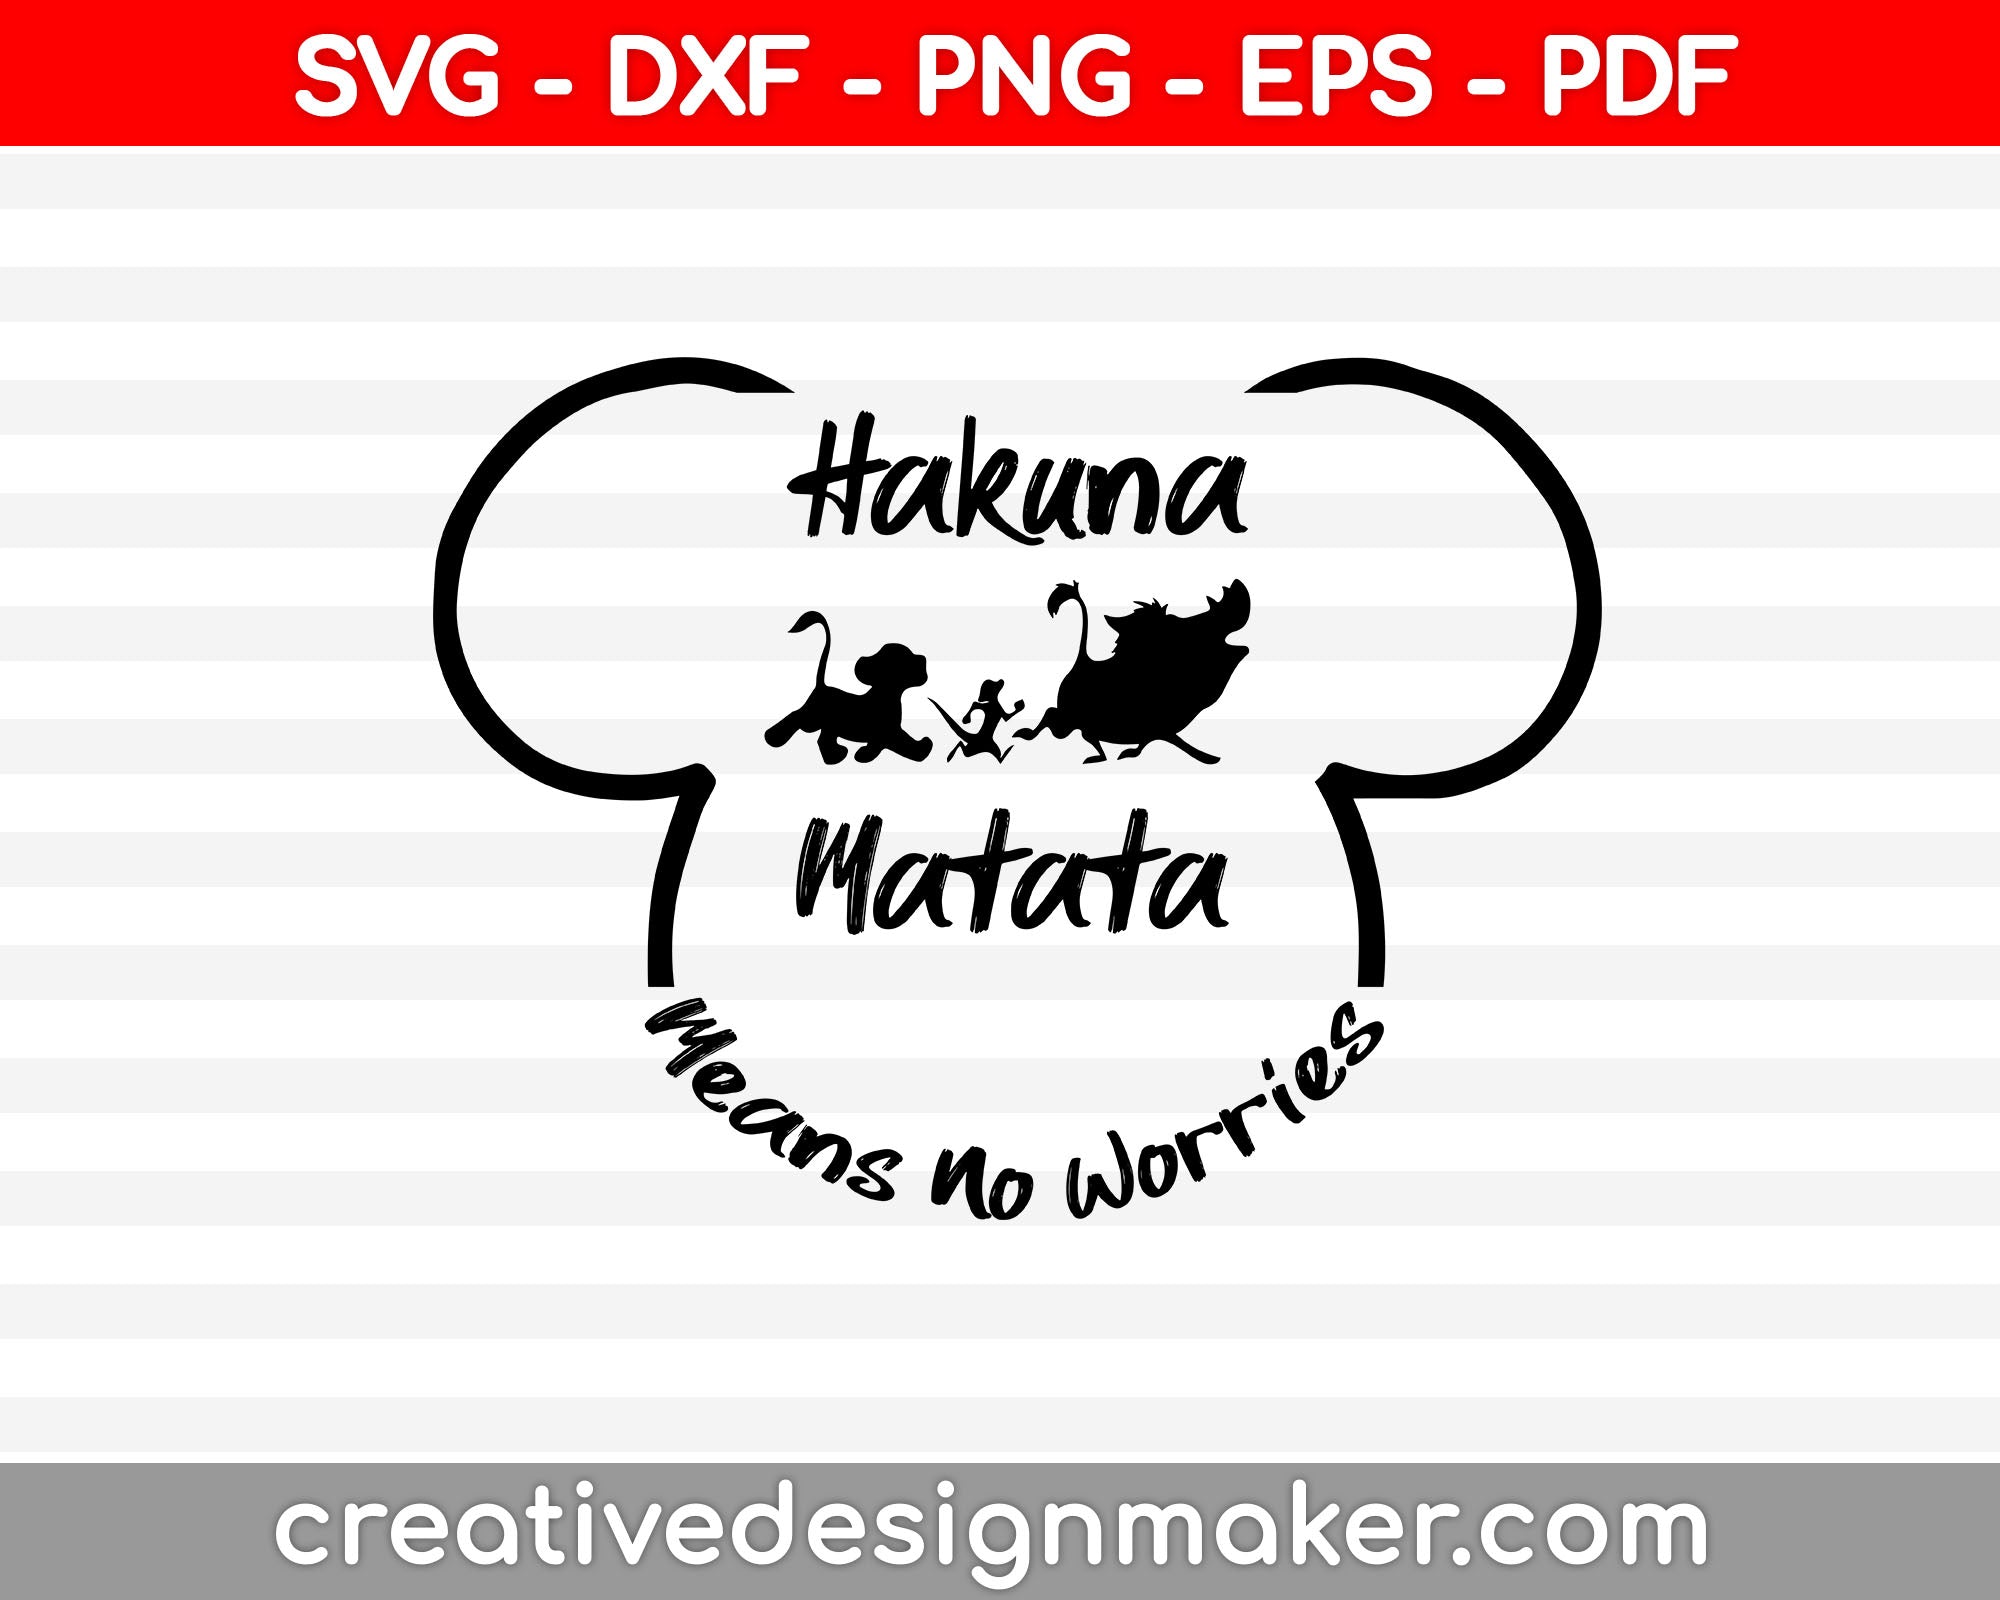 Hakuna Matata Means No Worries svg dxf png eps pdf File For Cameo And Printable Files